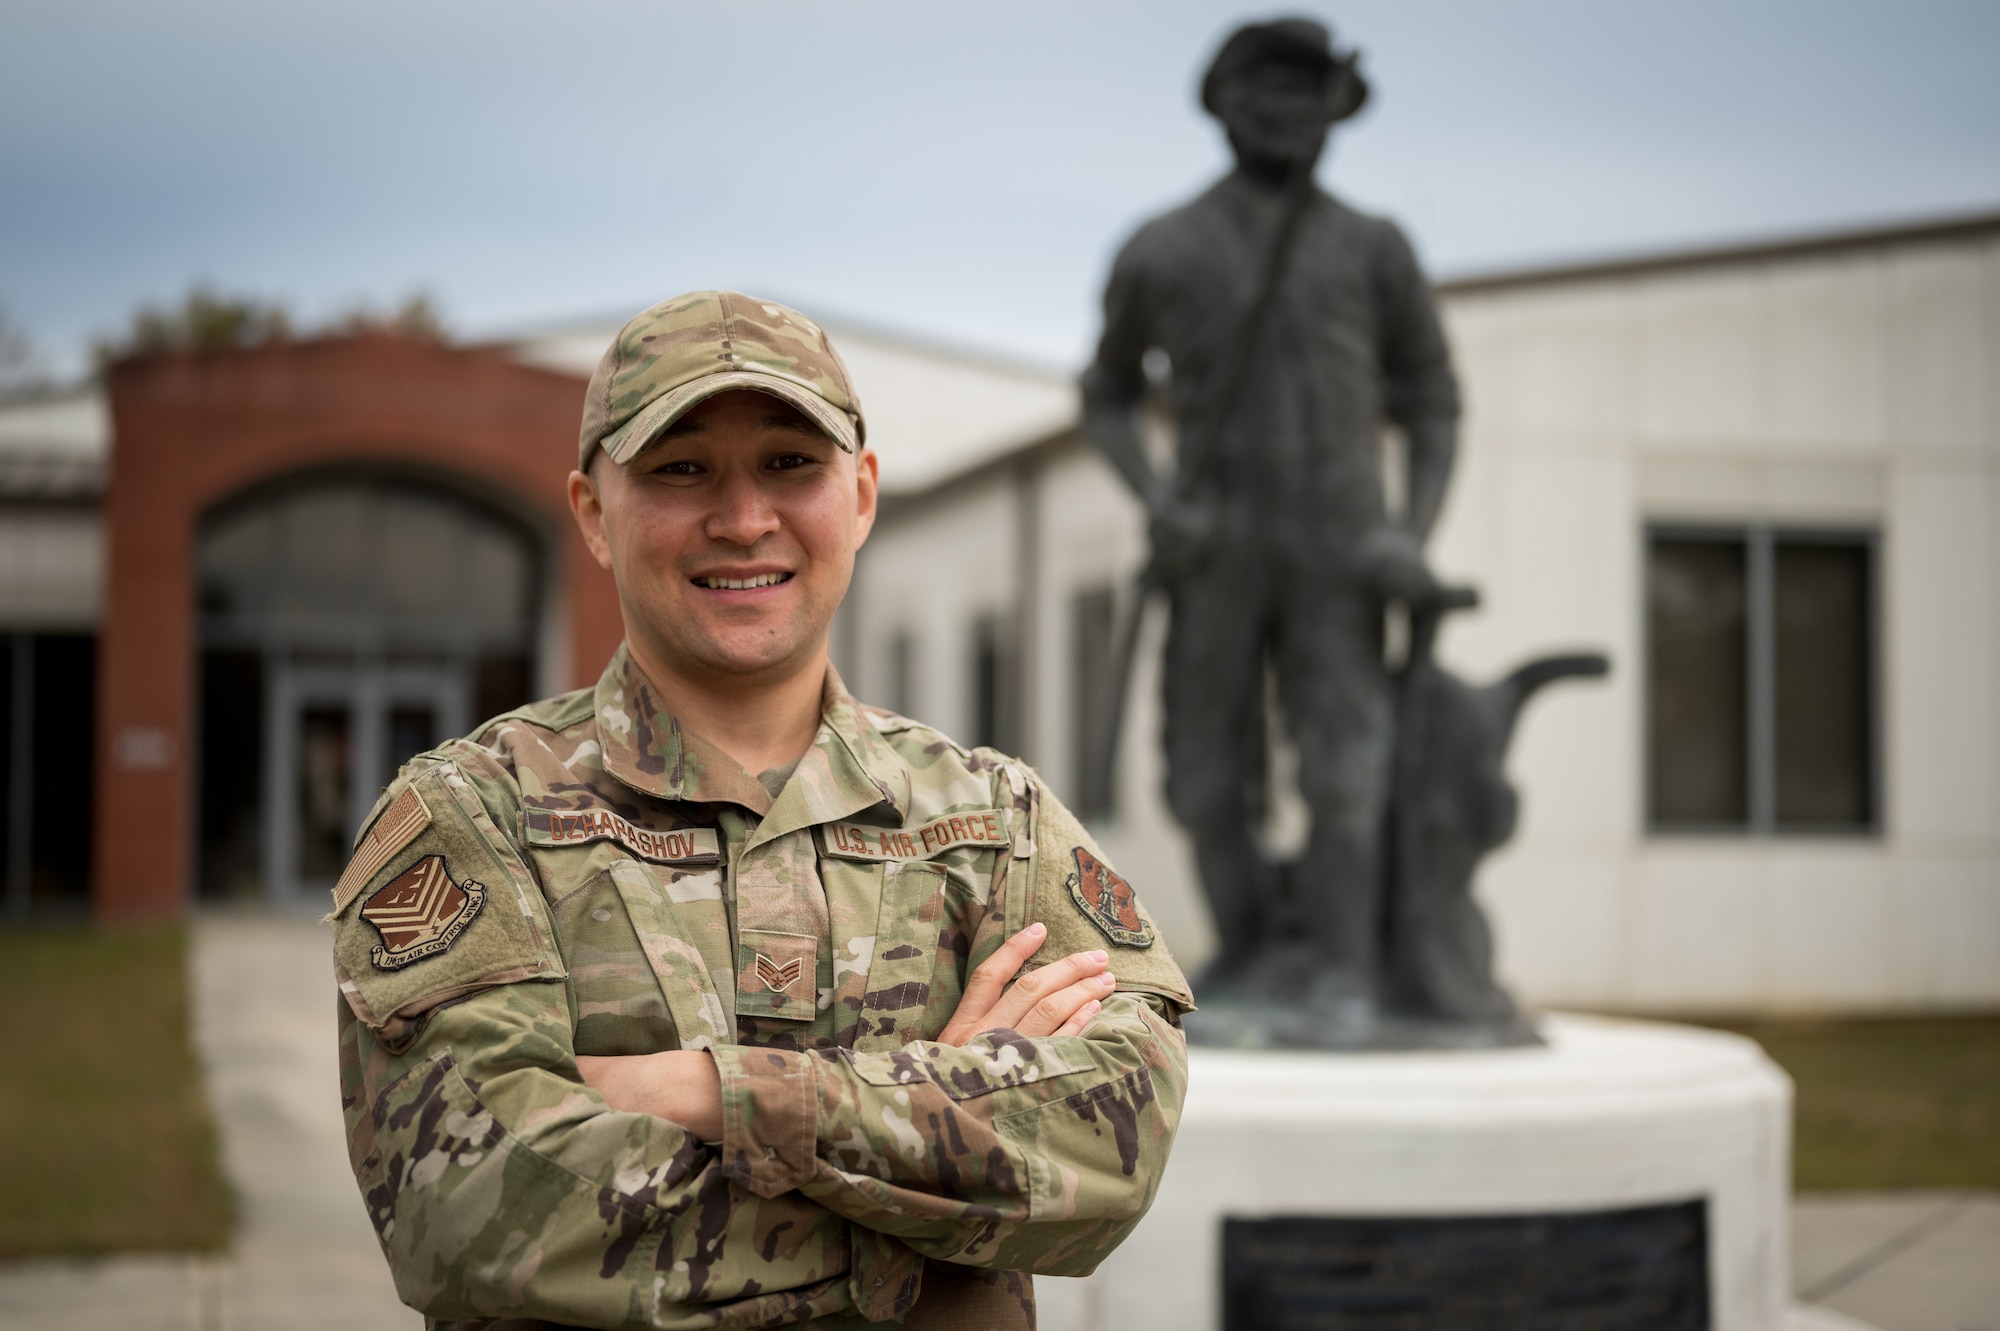 U.S. Air Force Senior Airman Asylbek Dzhapashov, personnelist with the 116th Air Control Wing, Georgia Air National Guard poses for a picture, Nov. 6, 2021.  Asylbek is a native of Kyrgyzstan who became a citizen of the United States and joined the Air National Guard. (U.S. Air National Guard photo by Capt. Ronald Cole)